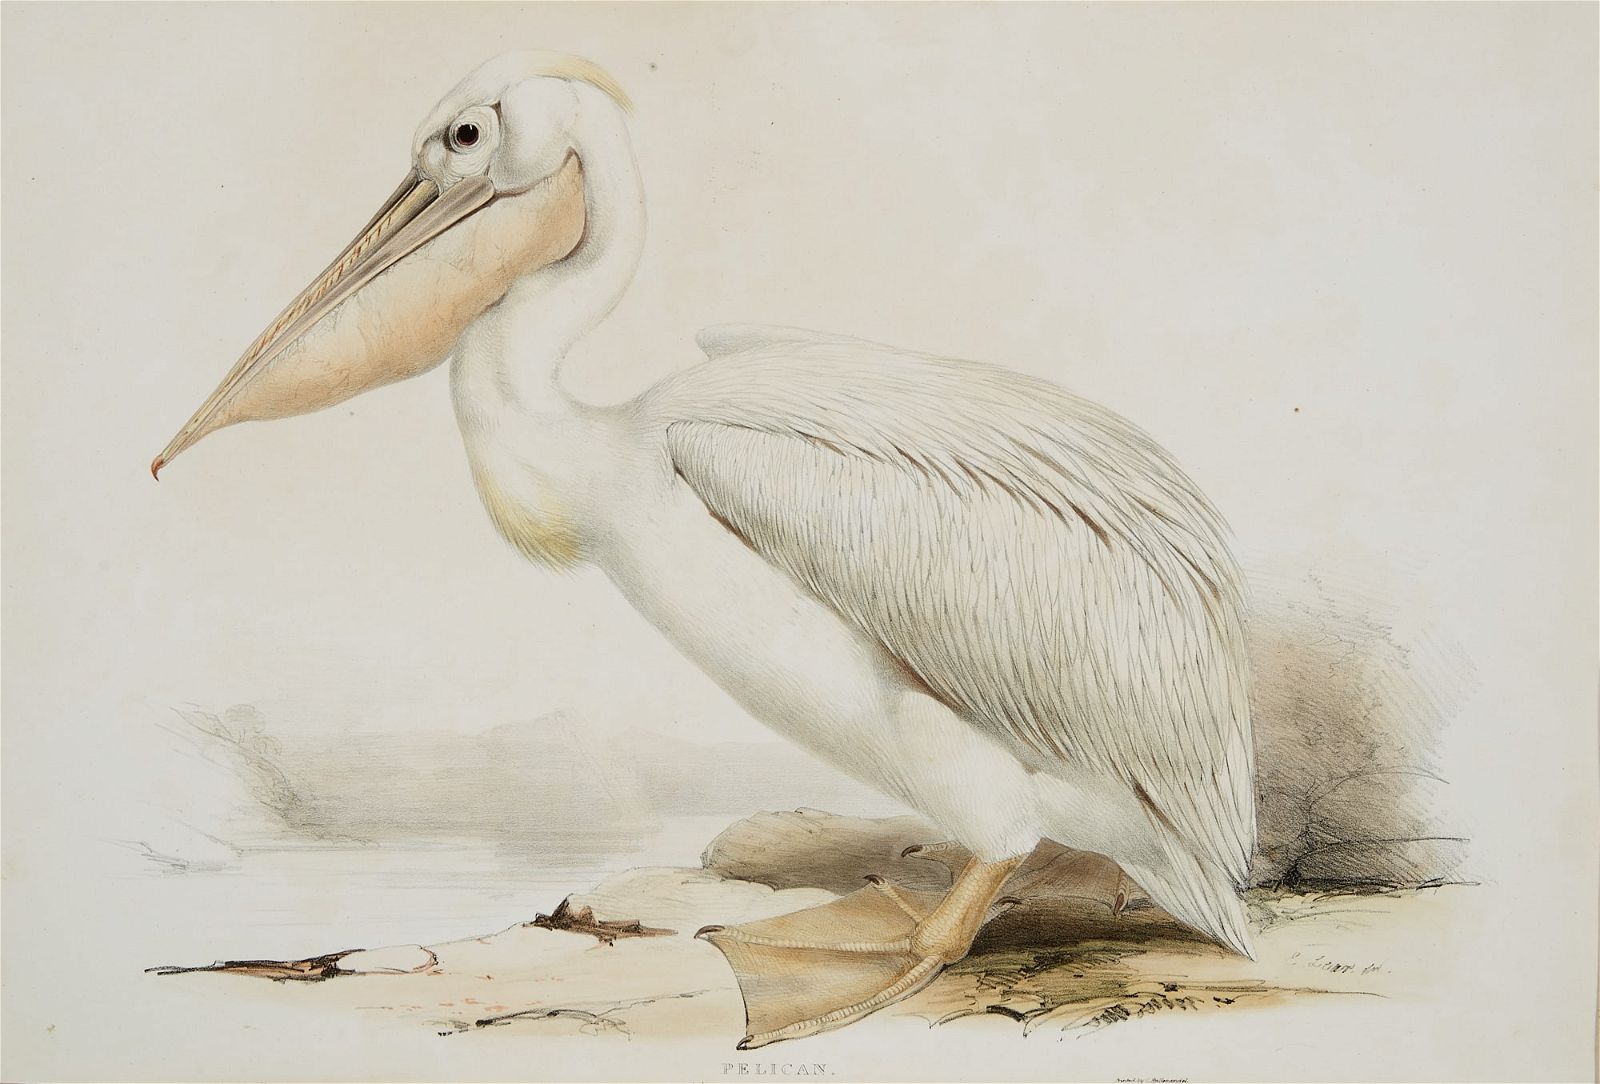 EDWARD LEAR, PELICAN, FROM THE